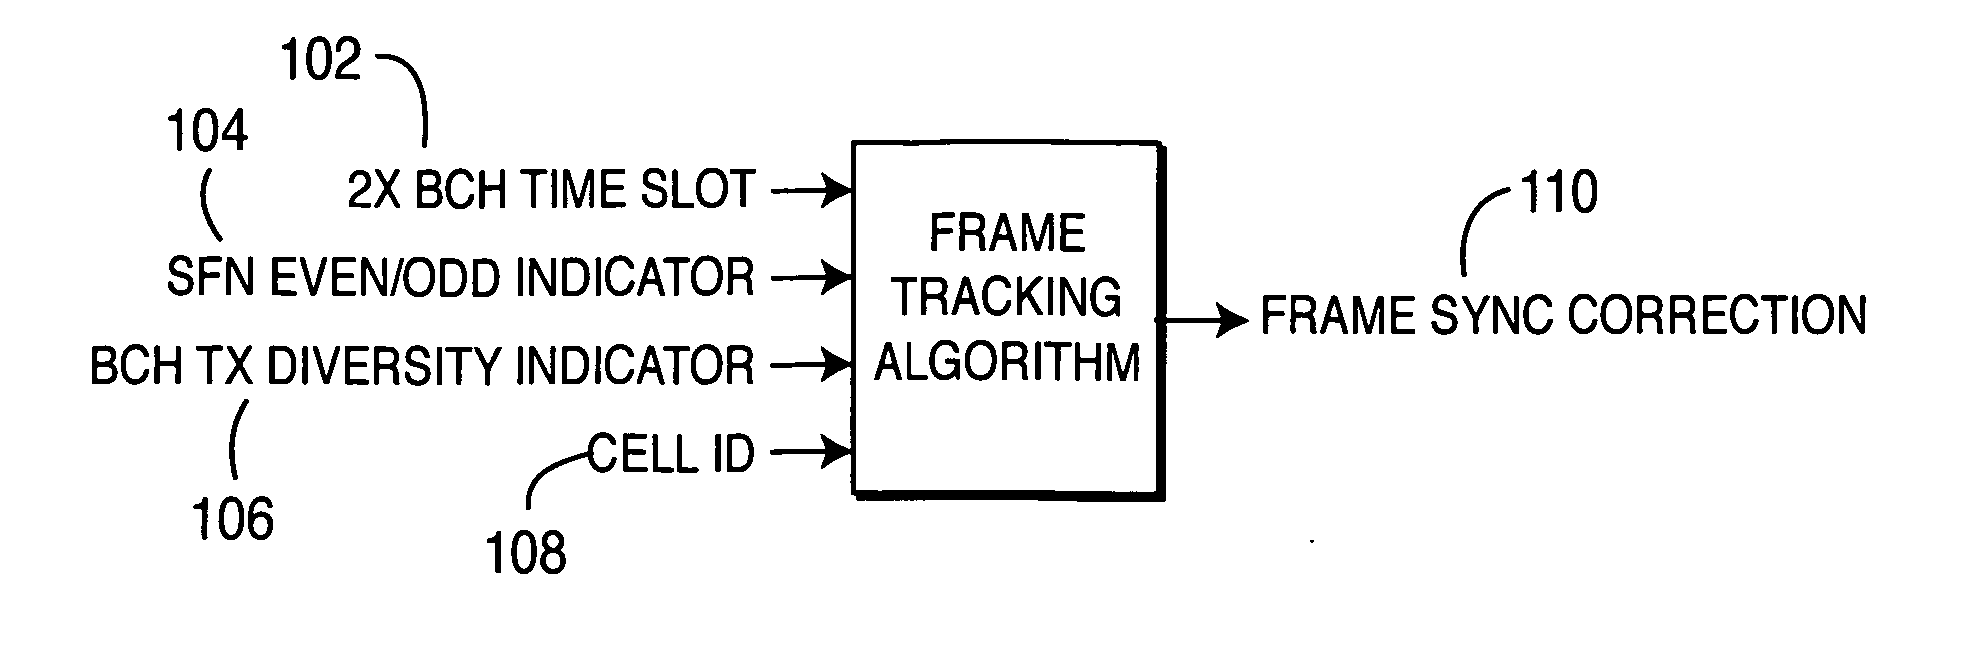 Efficient frame tracking in mobile receivers